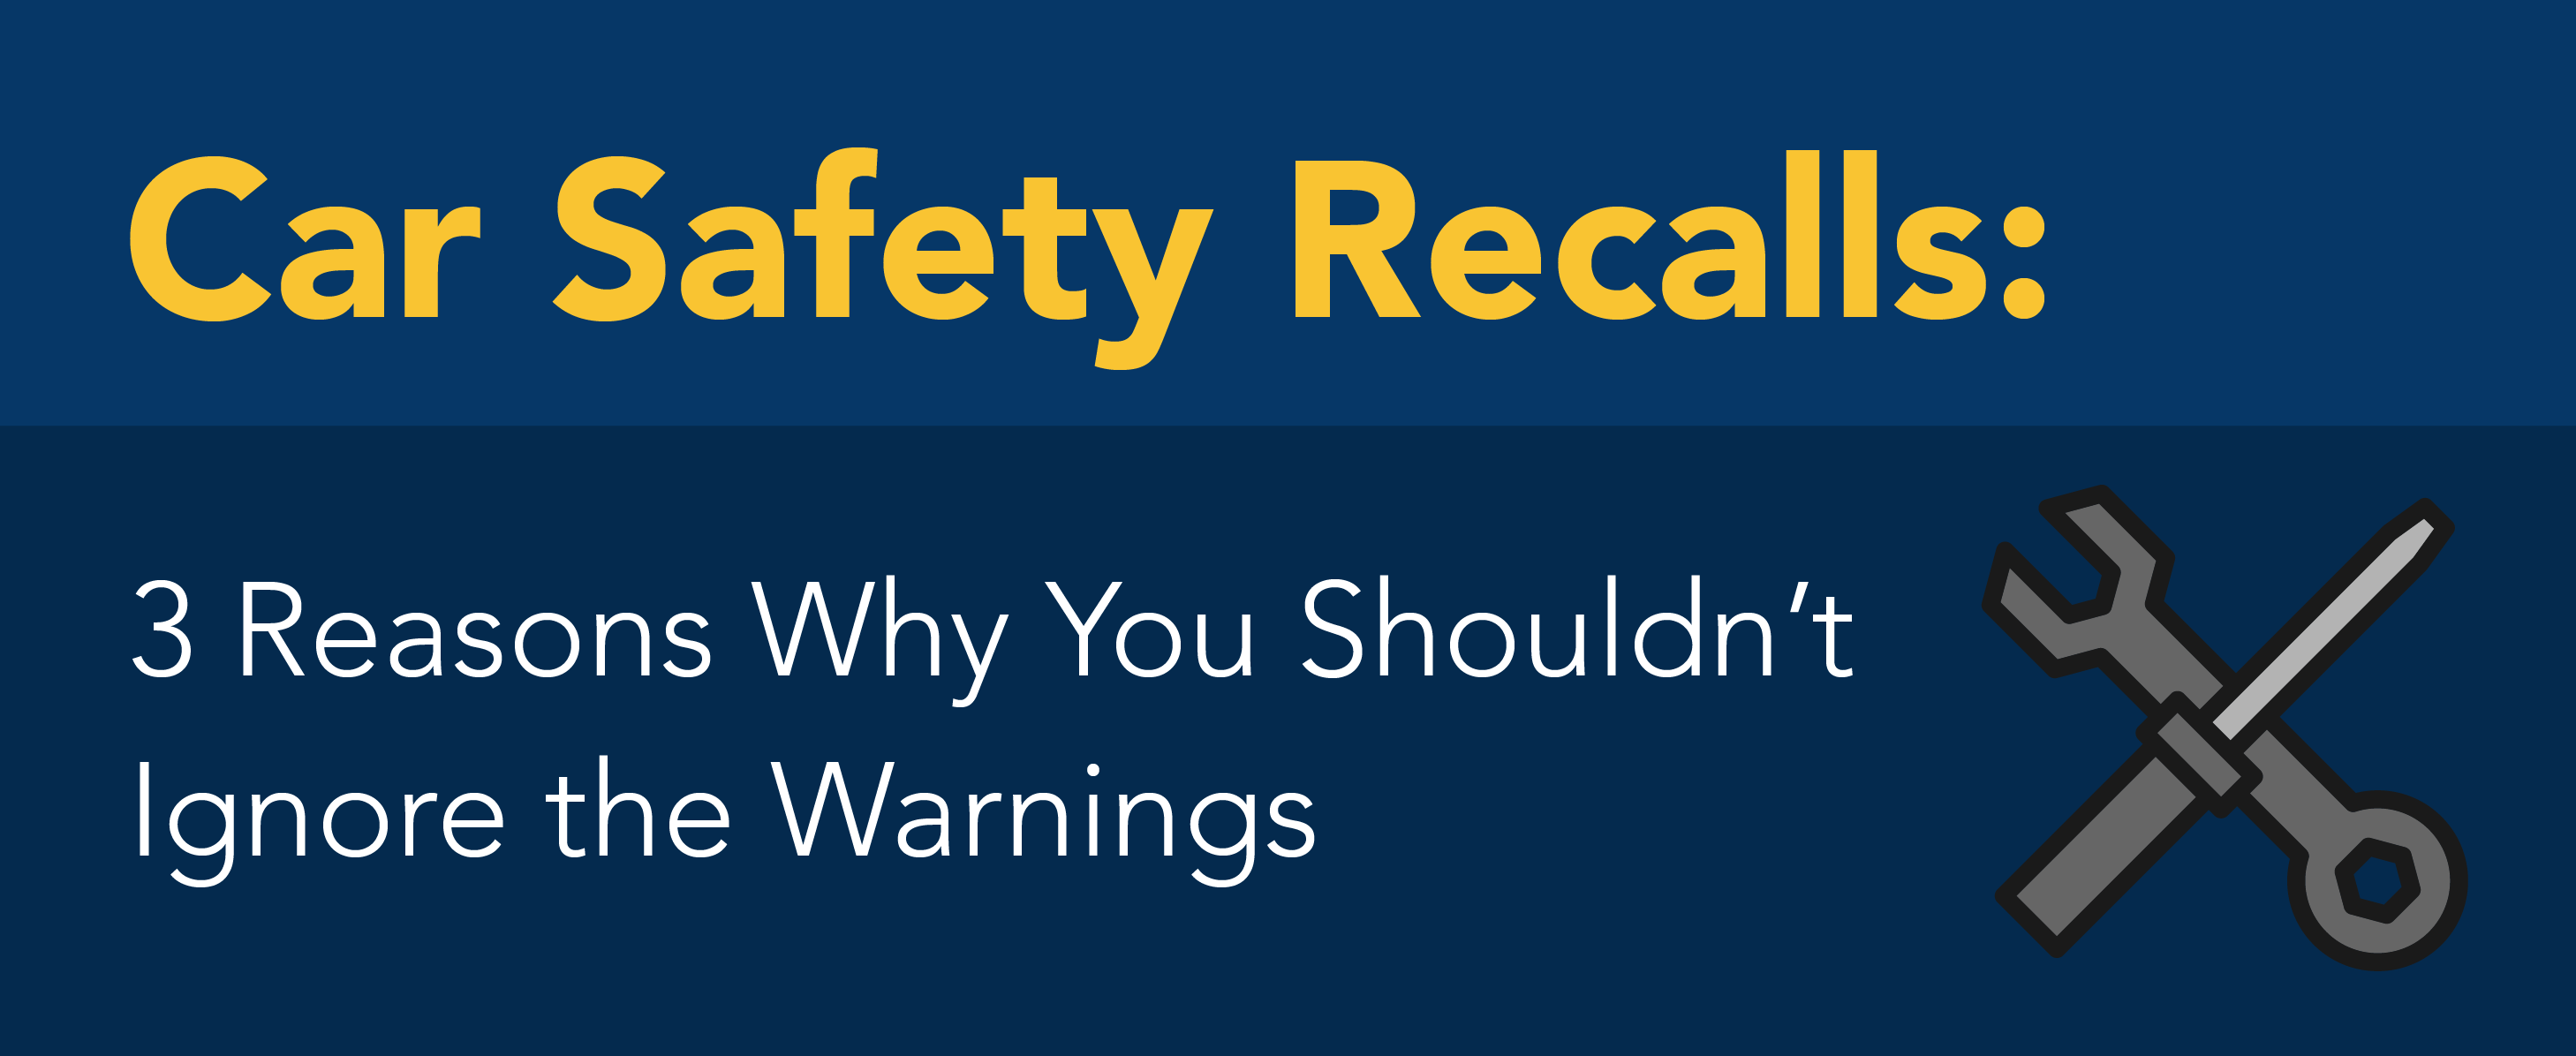 Car Safety Recalls: 3 reasons why you shouldn't ignore the warnings